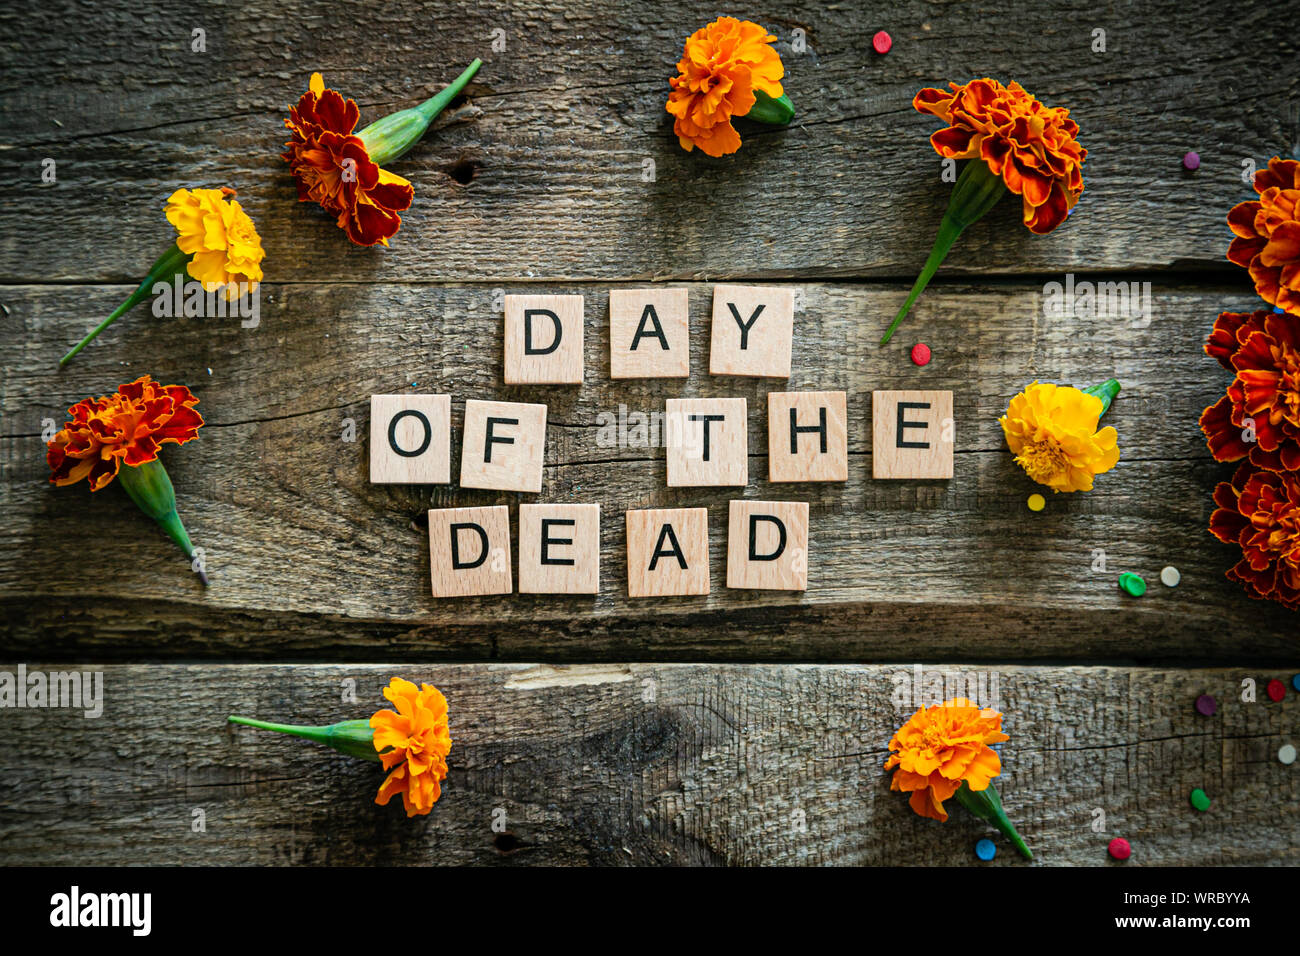 Day of the dead concept dia de los muertos - skull shapes cookie with marigold flowers Stock Photo